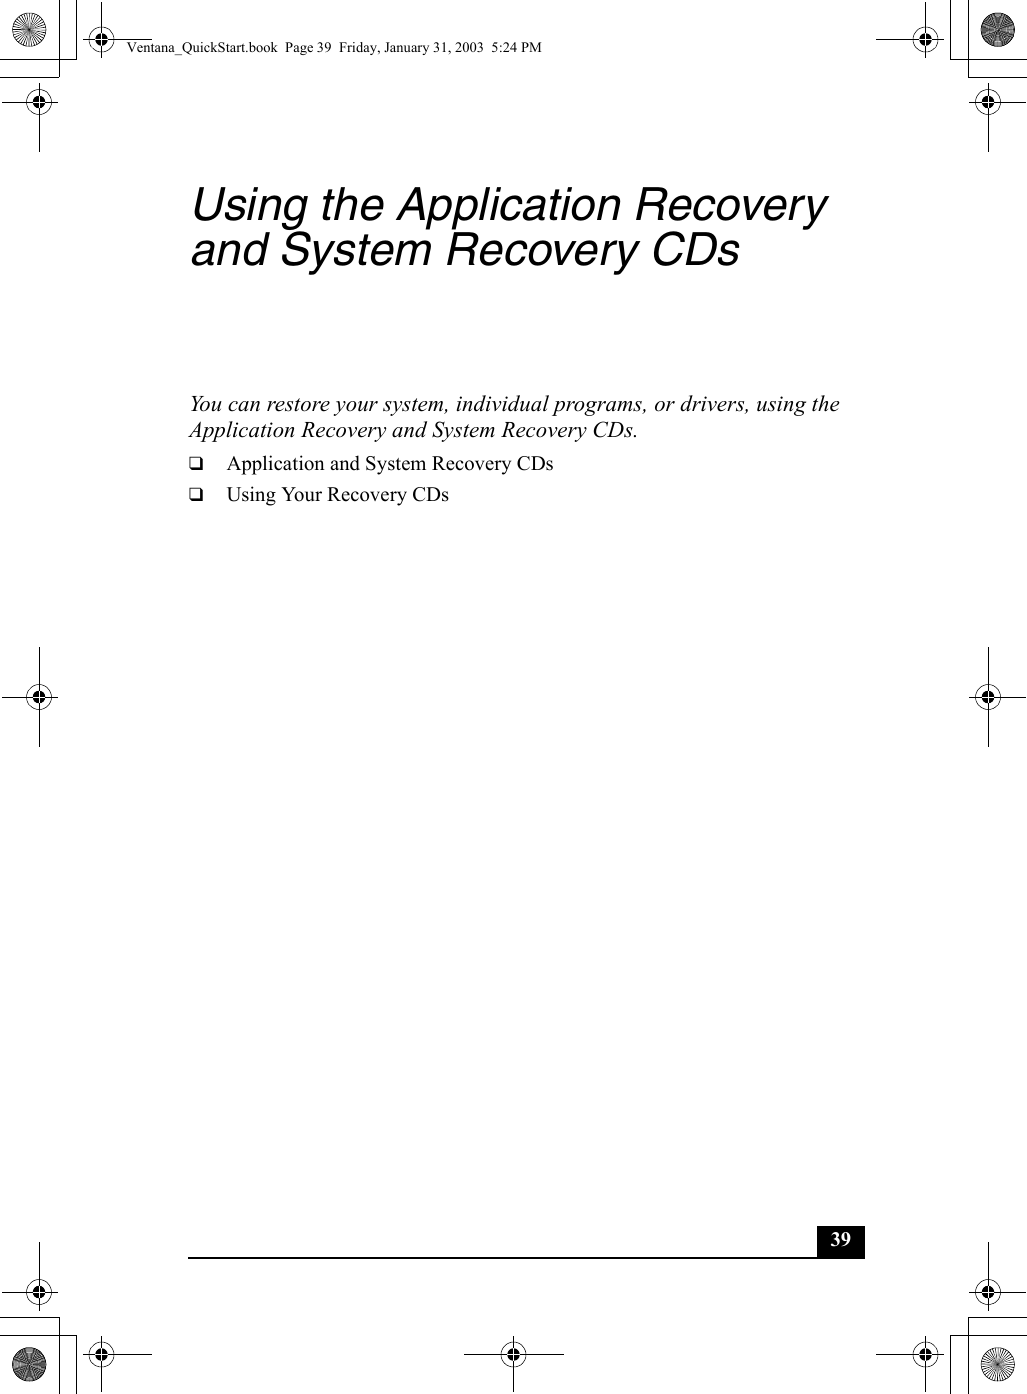 39Using the Application Recovery and System Recovery CDsYou can restore your system, individual programs, or drivers, using the Application Recovery and System Recovery CDs.❑Application and System Recovery CDs❑Using Your Recovery CDsVentana_QuickStart.book  Page 39  Friday, January 31, 2003  5:24 PM